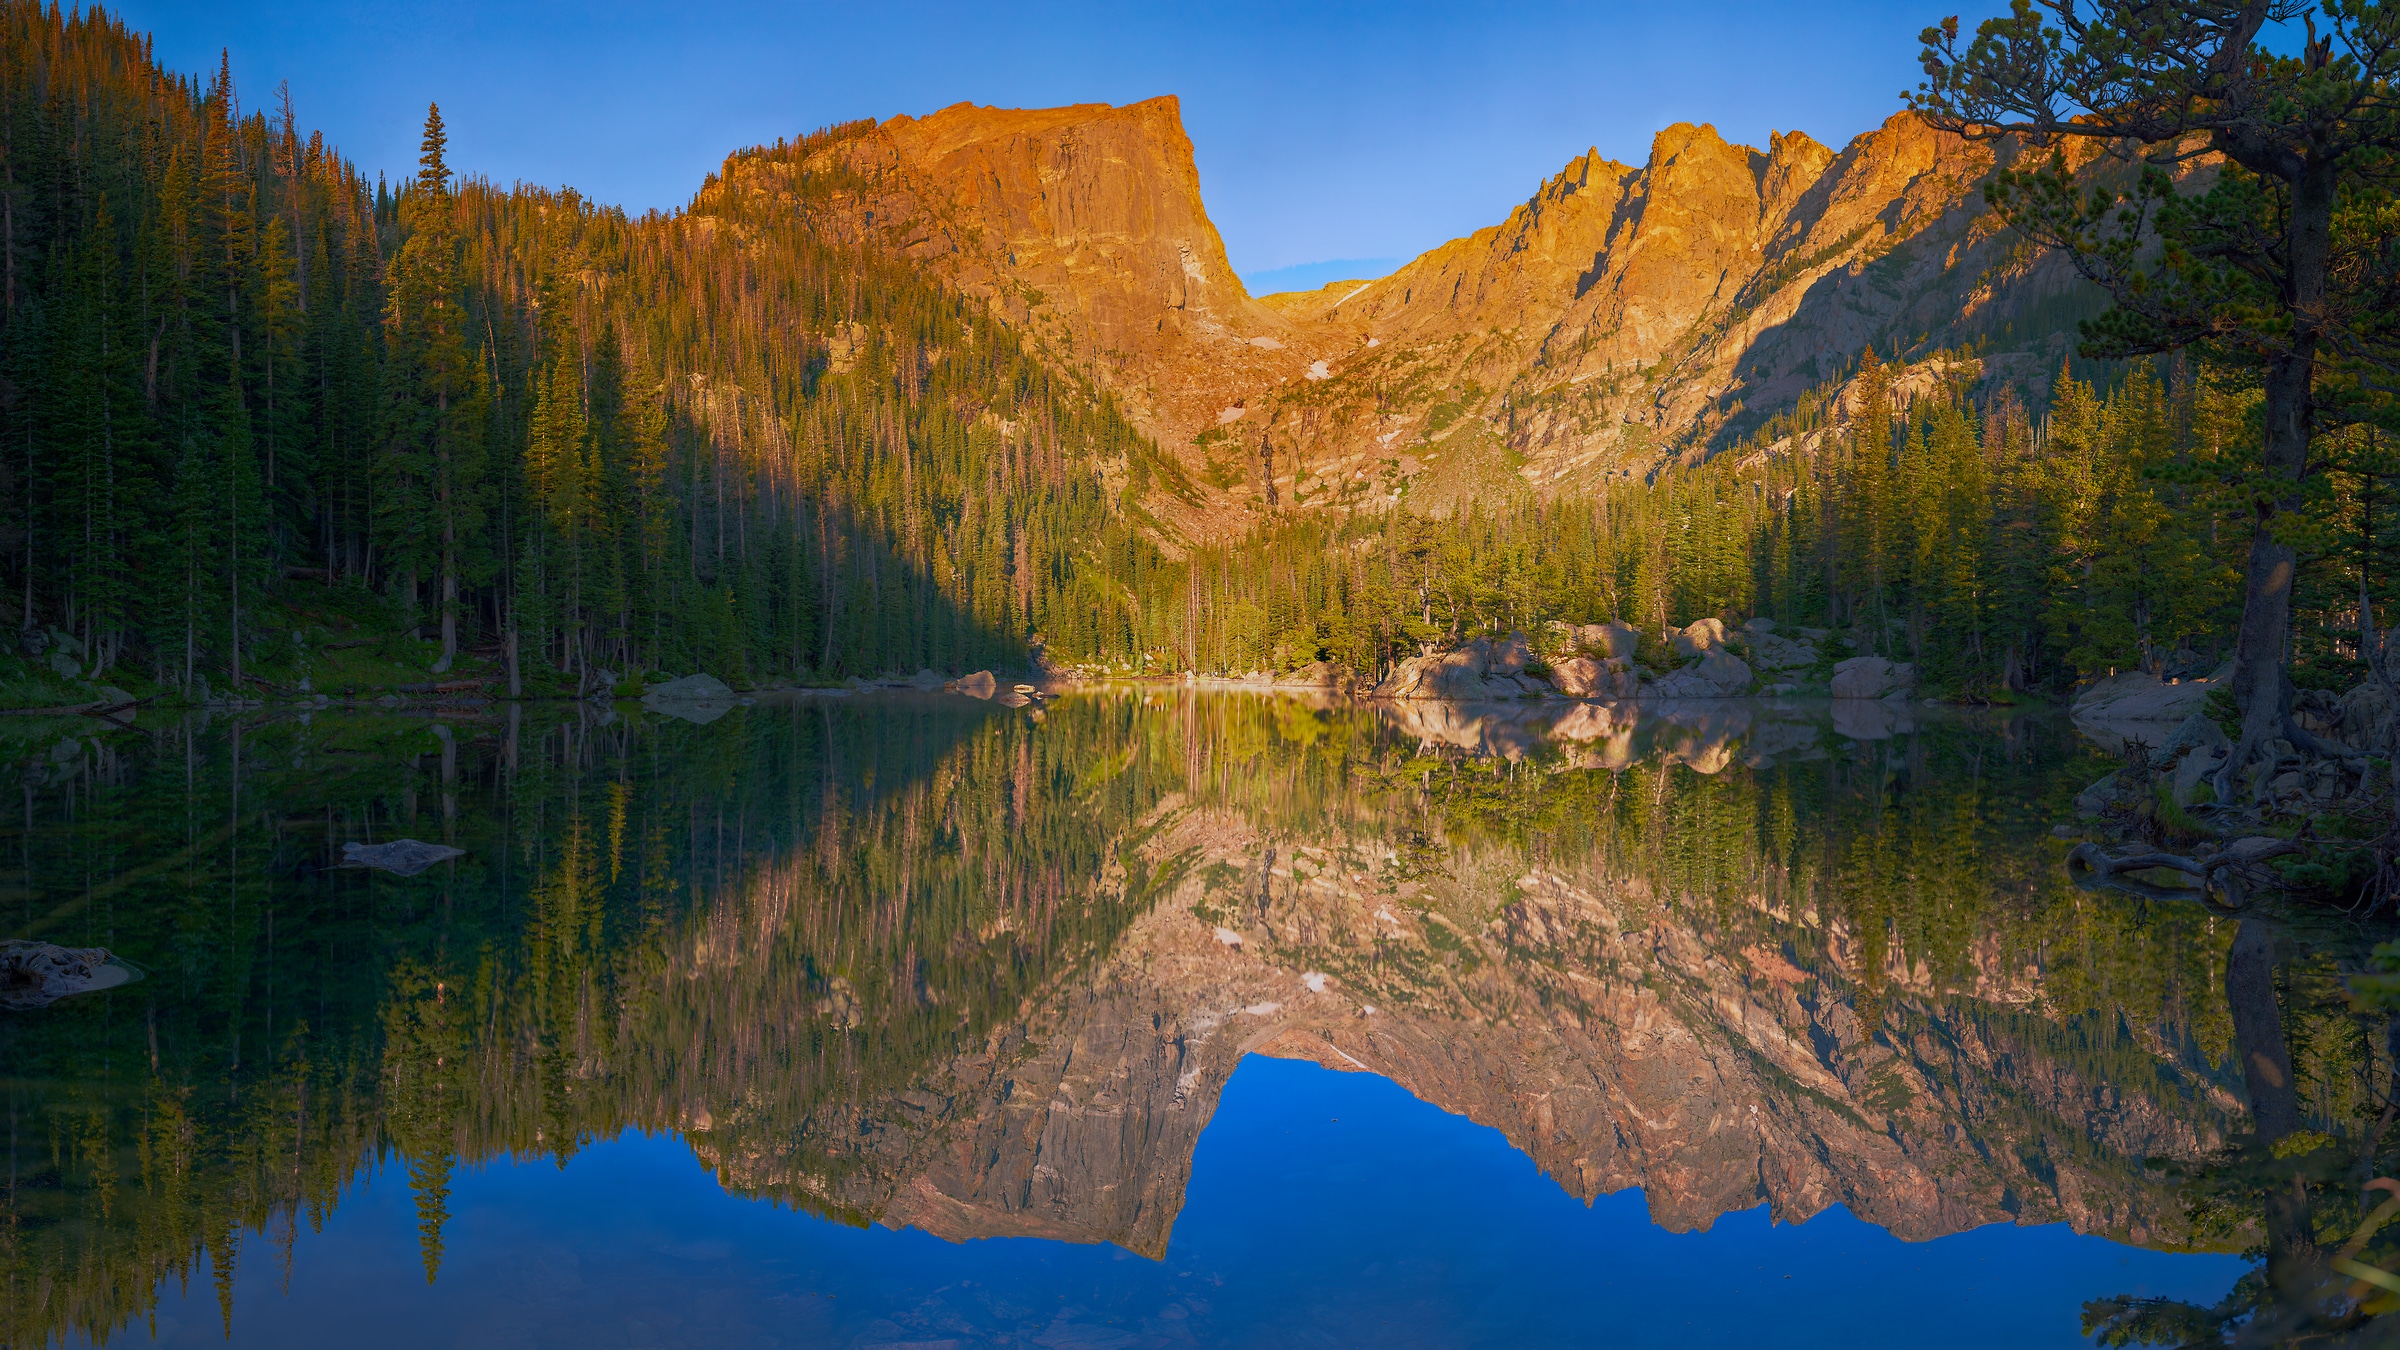 6,262 megapixels! A very high resolution, large-format wallpaper photo of a peaceful lake with mountains and pine trees; landscape photograph created by John Freeman at Dream Lake in Rocky Mountain National Park, Colorado.